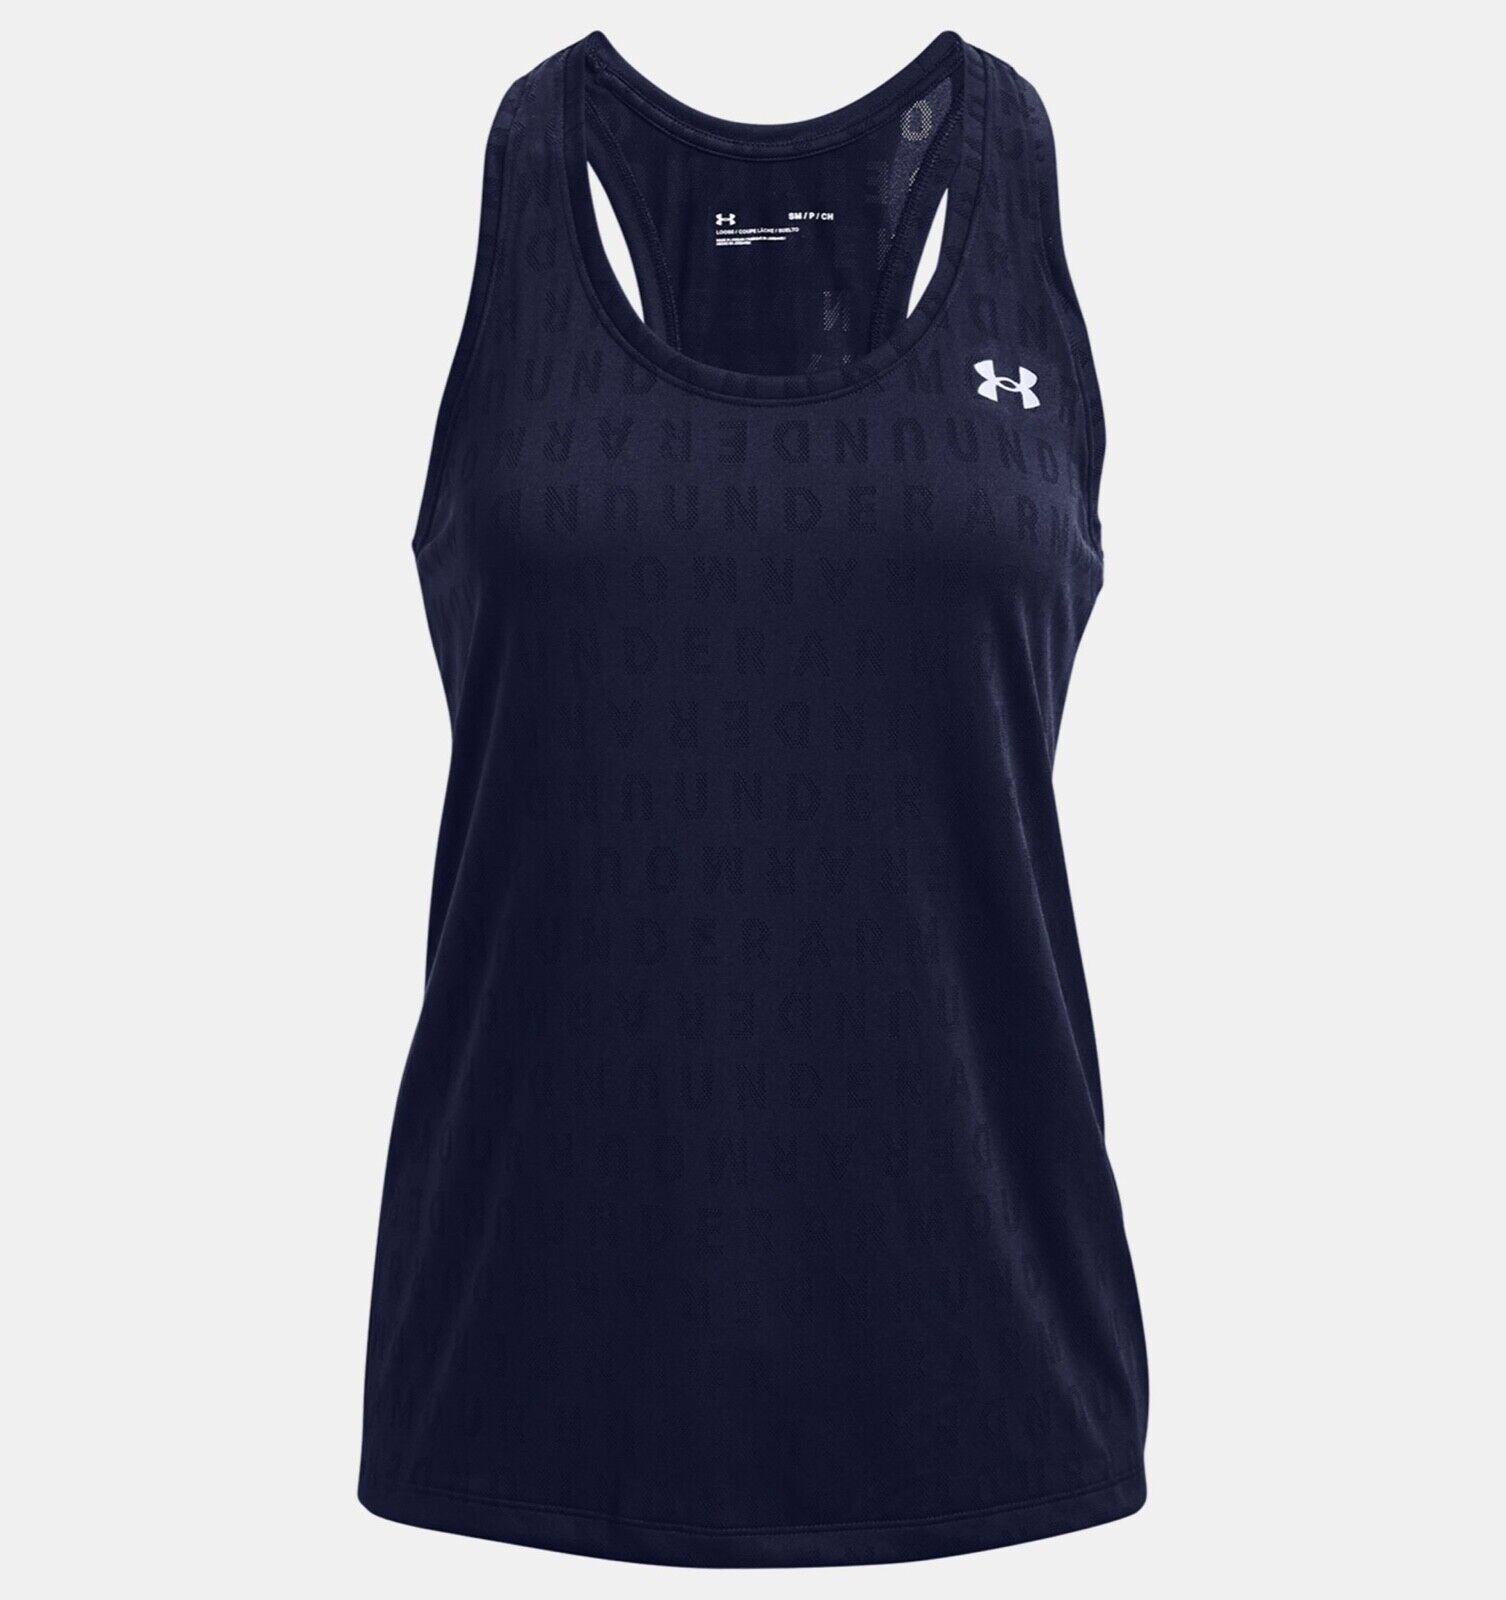 Primary image for Under Armour Womens Velocity Wordmark Jacquard Racerback Tank-NAVY BLUE XL LARGE